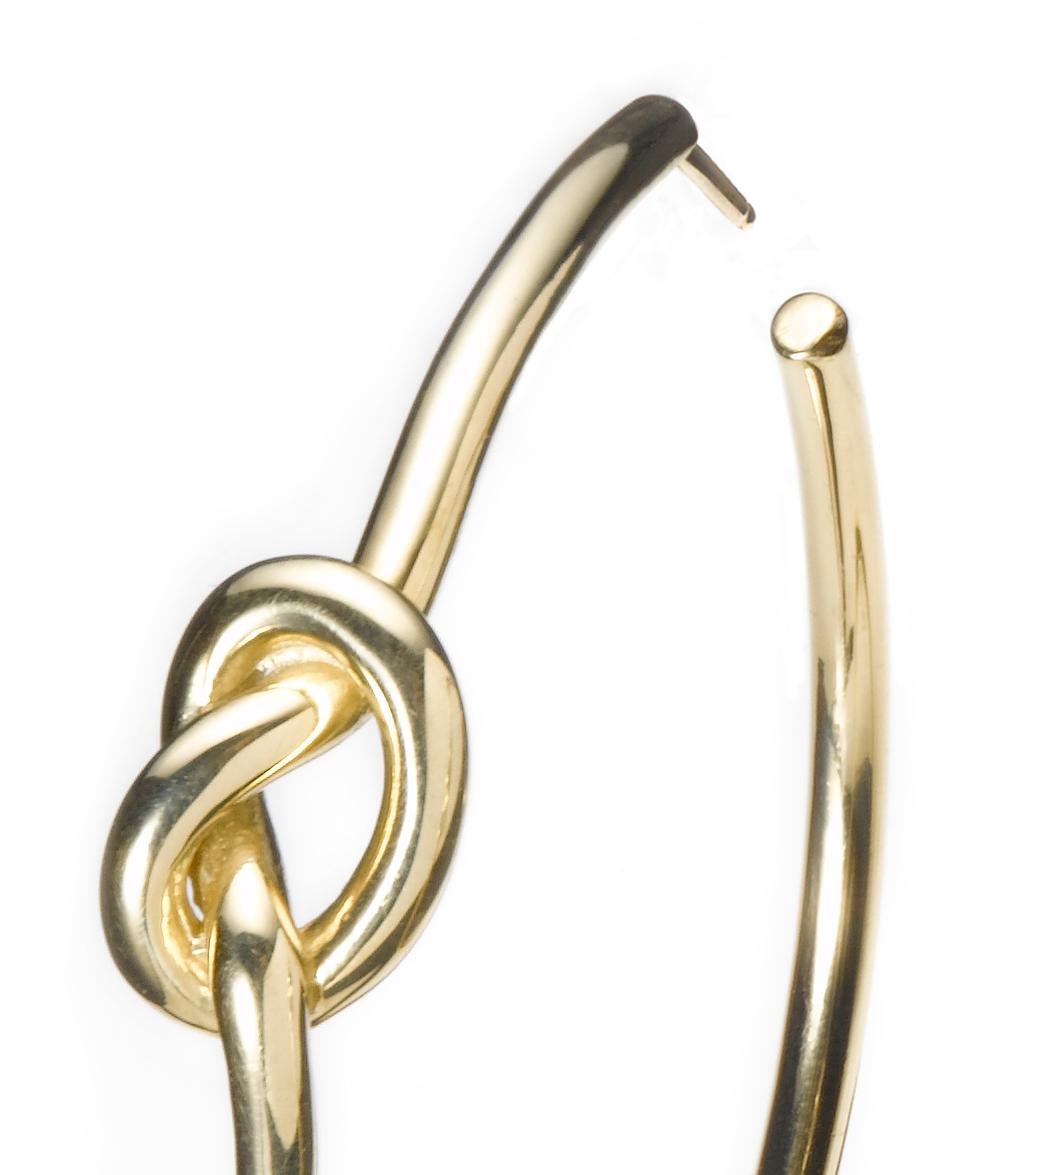 Gorgeous gold hoops with a love knot detail that makes them very special.

solid 18k gold 
1.25